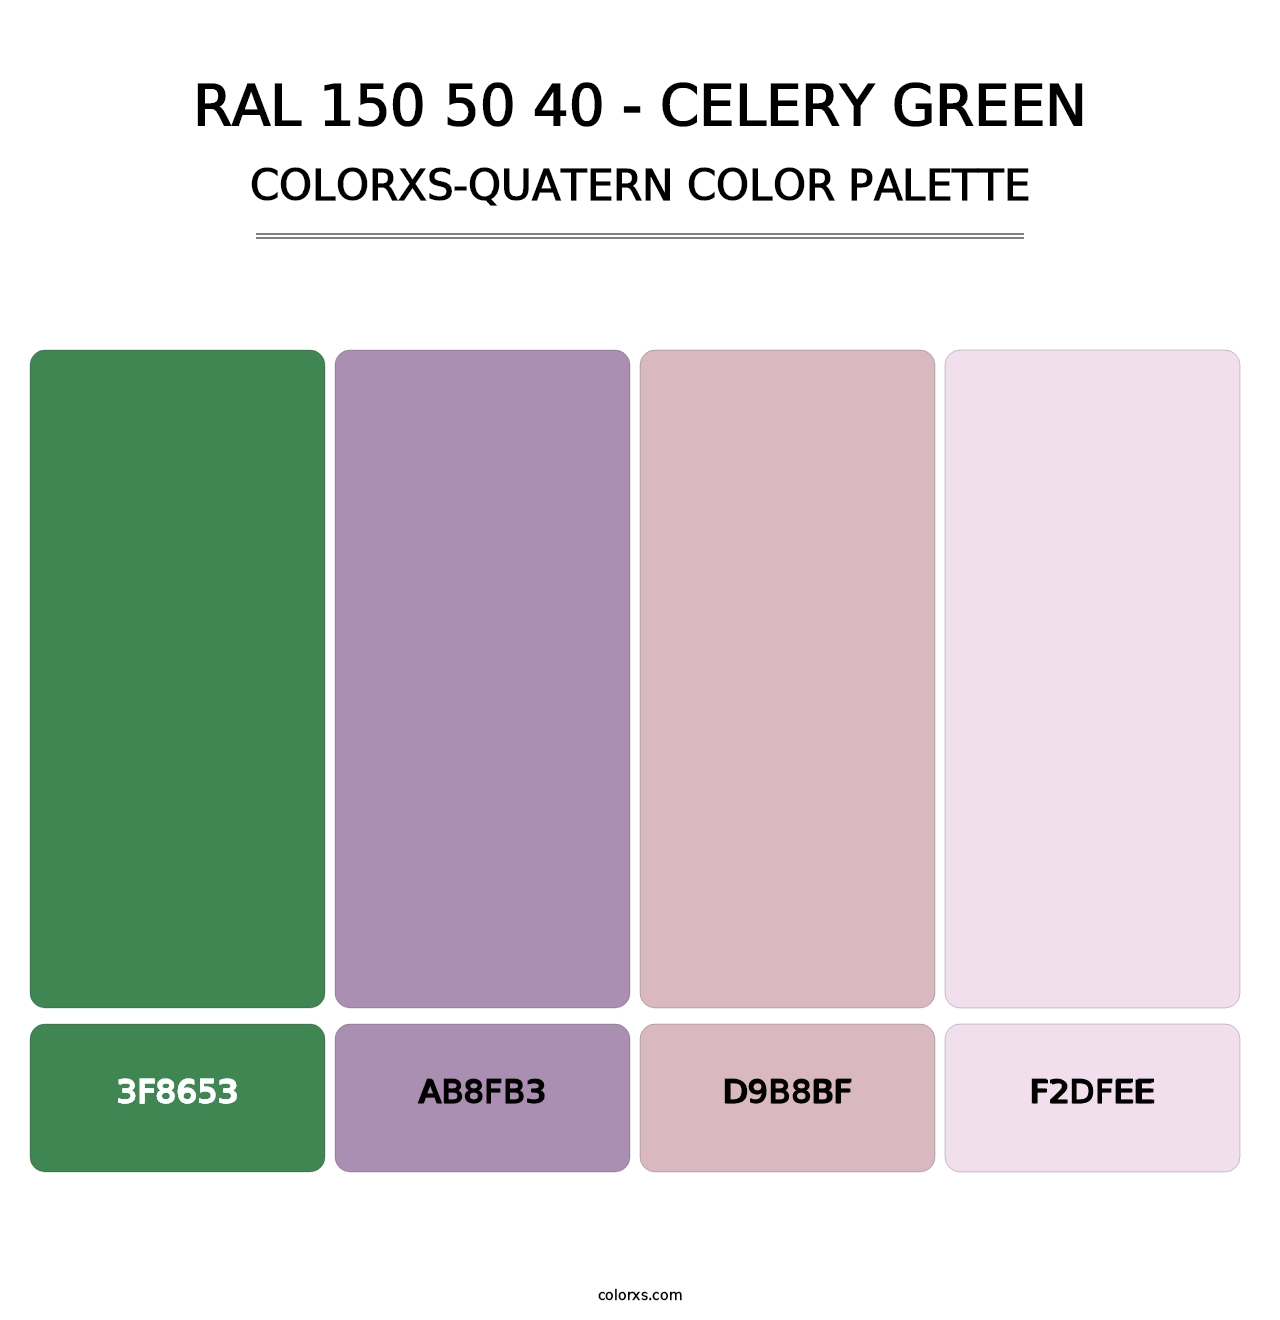 RAL 150 50 40 - Celery Green - Colorxs Quatern Palette